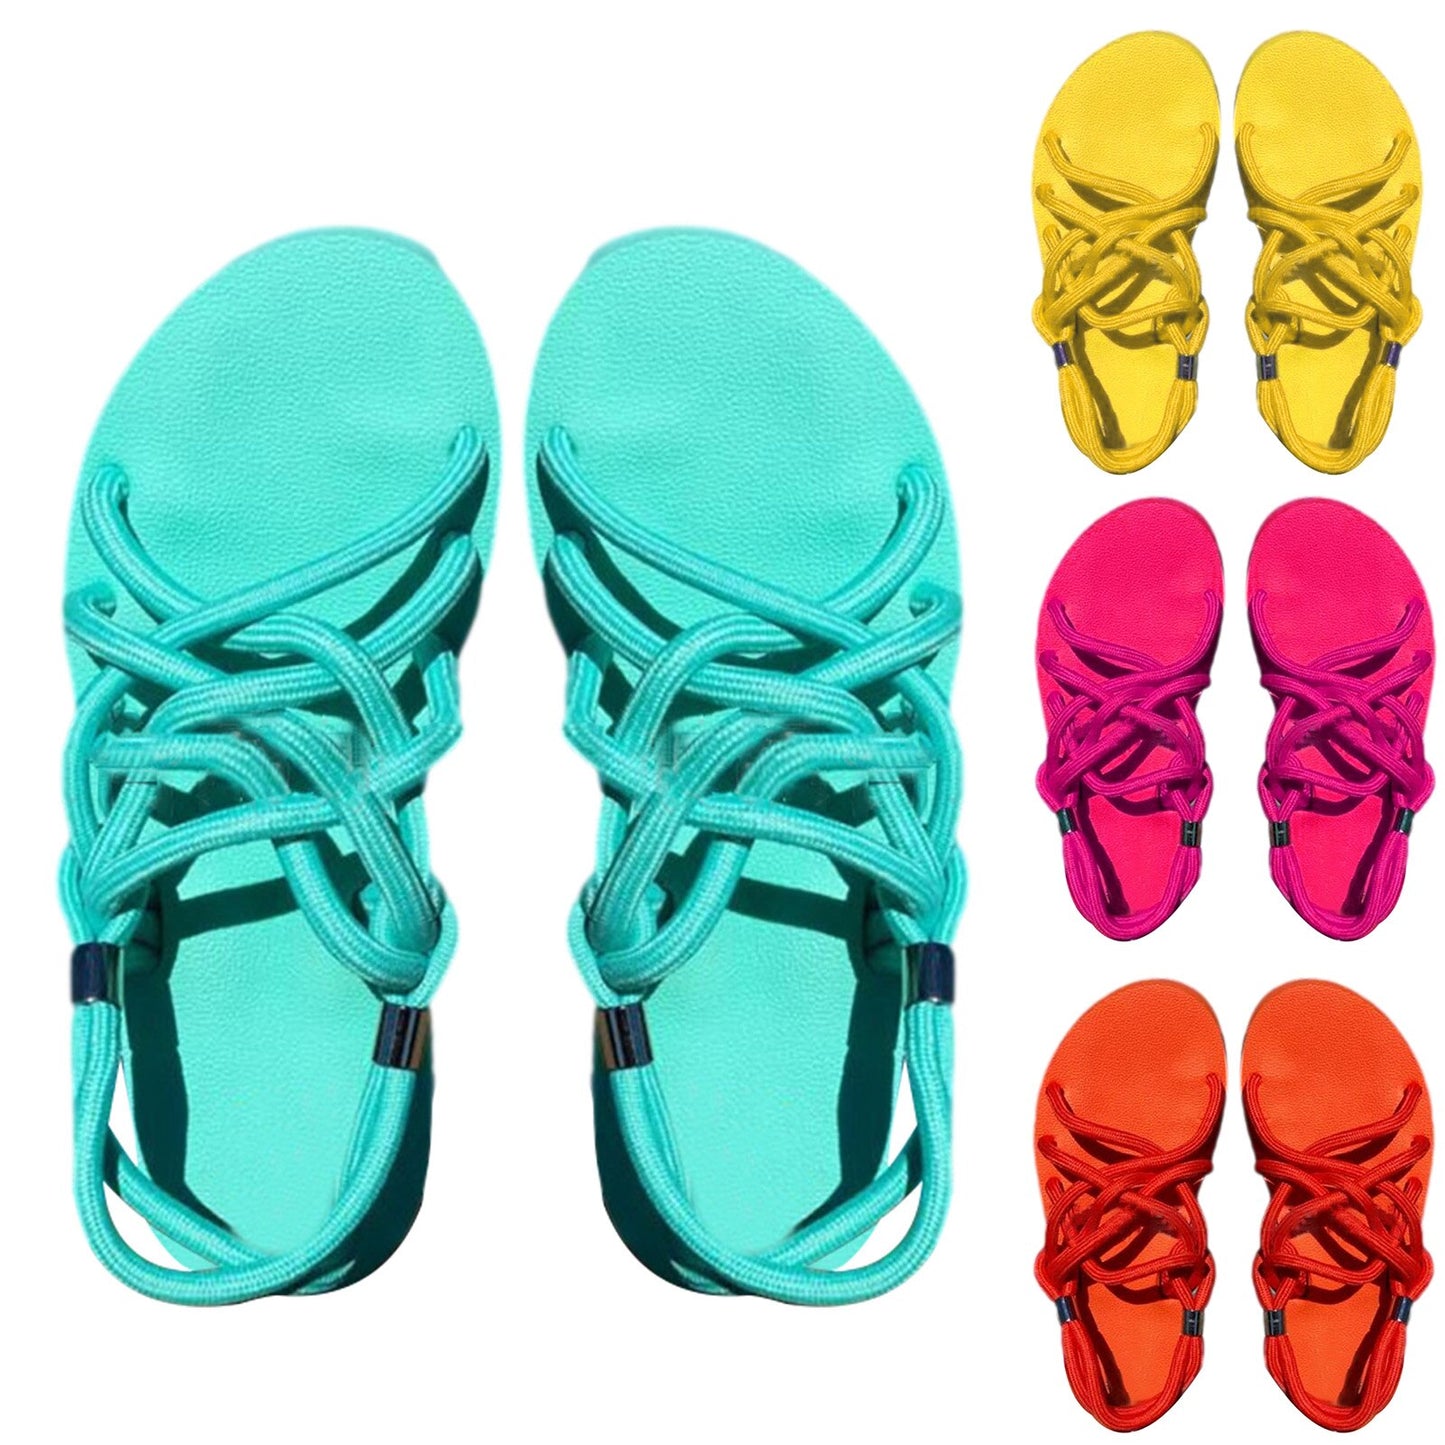 Women Sandals Platform Sandals Shoes Women Sandals Summer Flat Braided Rope Sandals Beach Shoes - TRIPLE AAA Fashion Collection